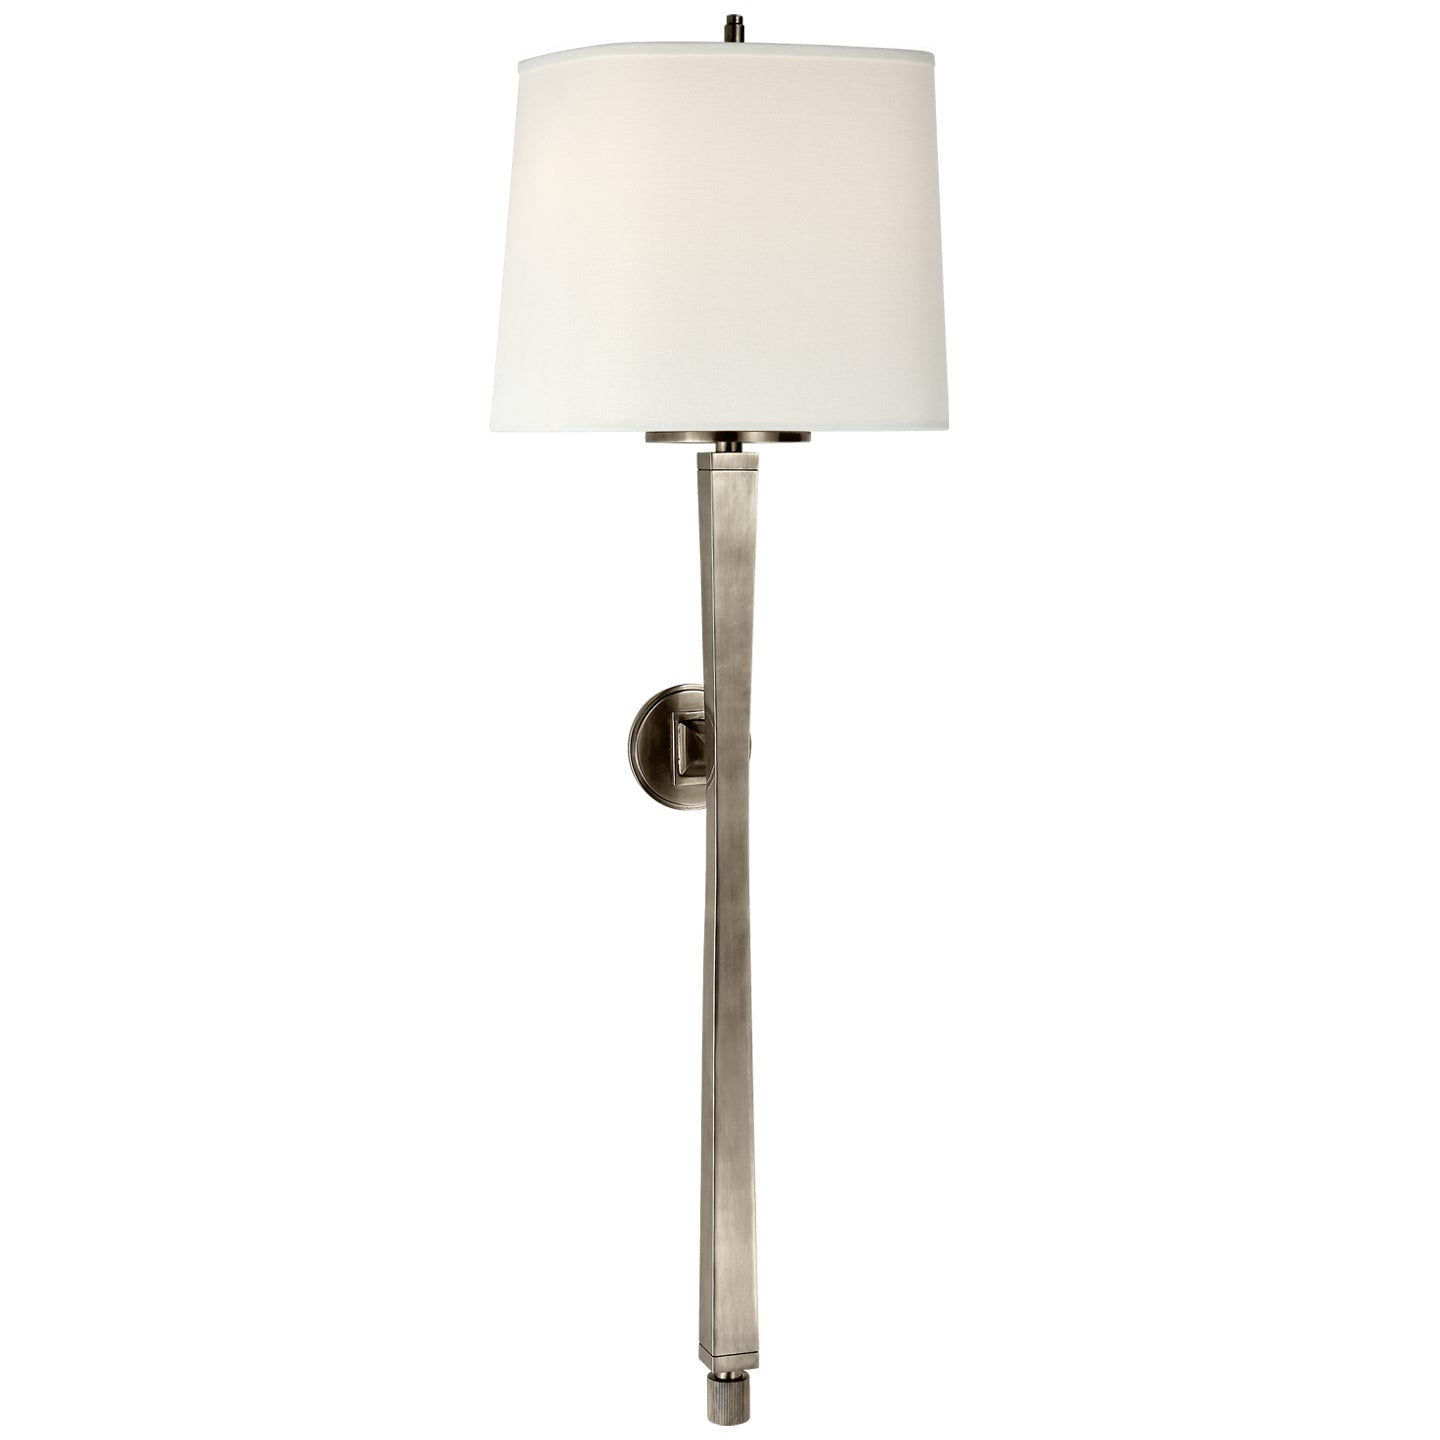 Load image into Gallery viewer, Visual Comfort Signature - TOB 2741AN-L - Two Light Wall Sconce - Edie - Antique Nickel
